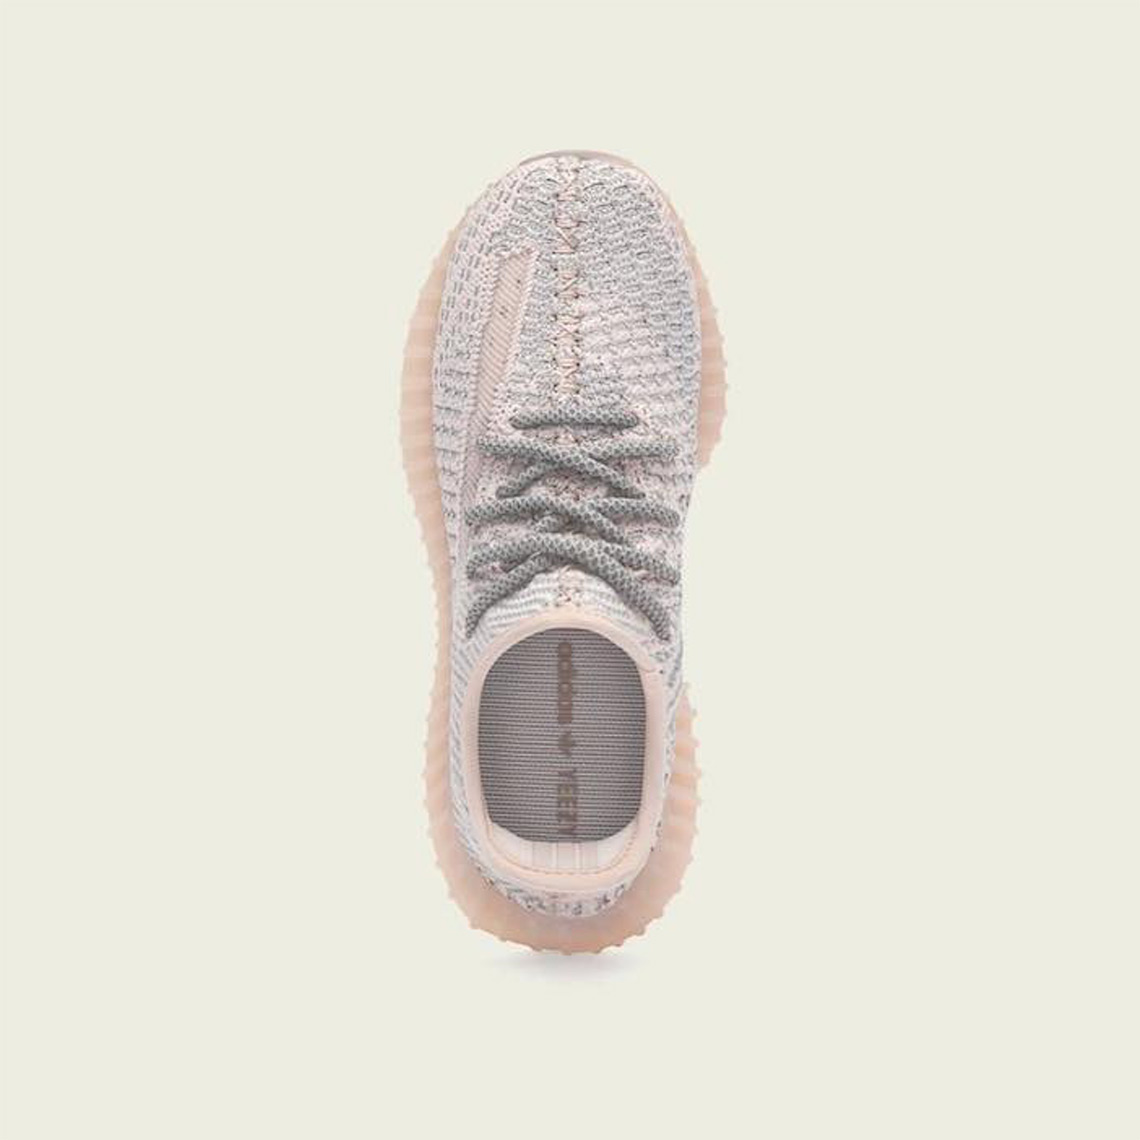 Adidas Yeezy 350 Synth Release Date 4